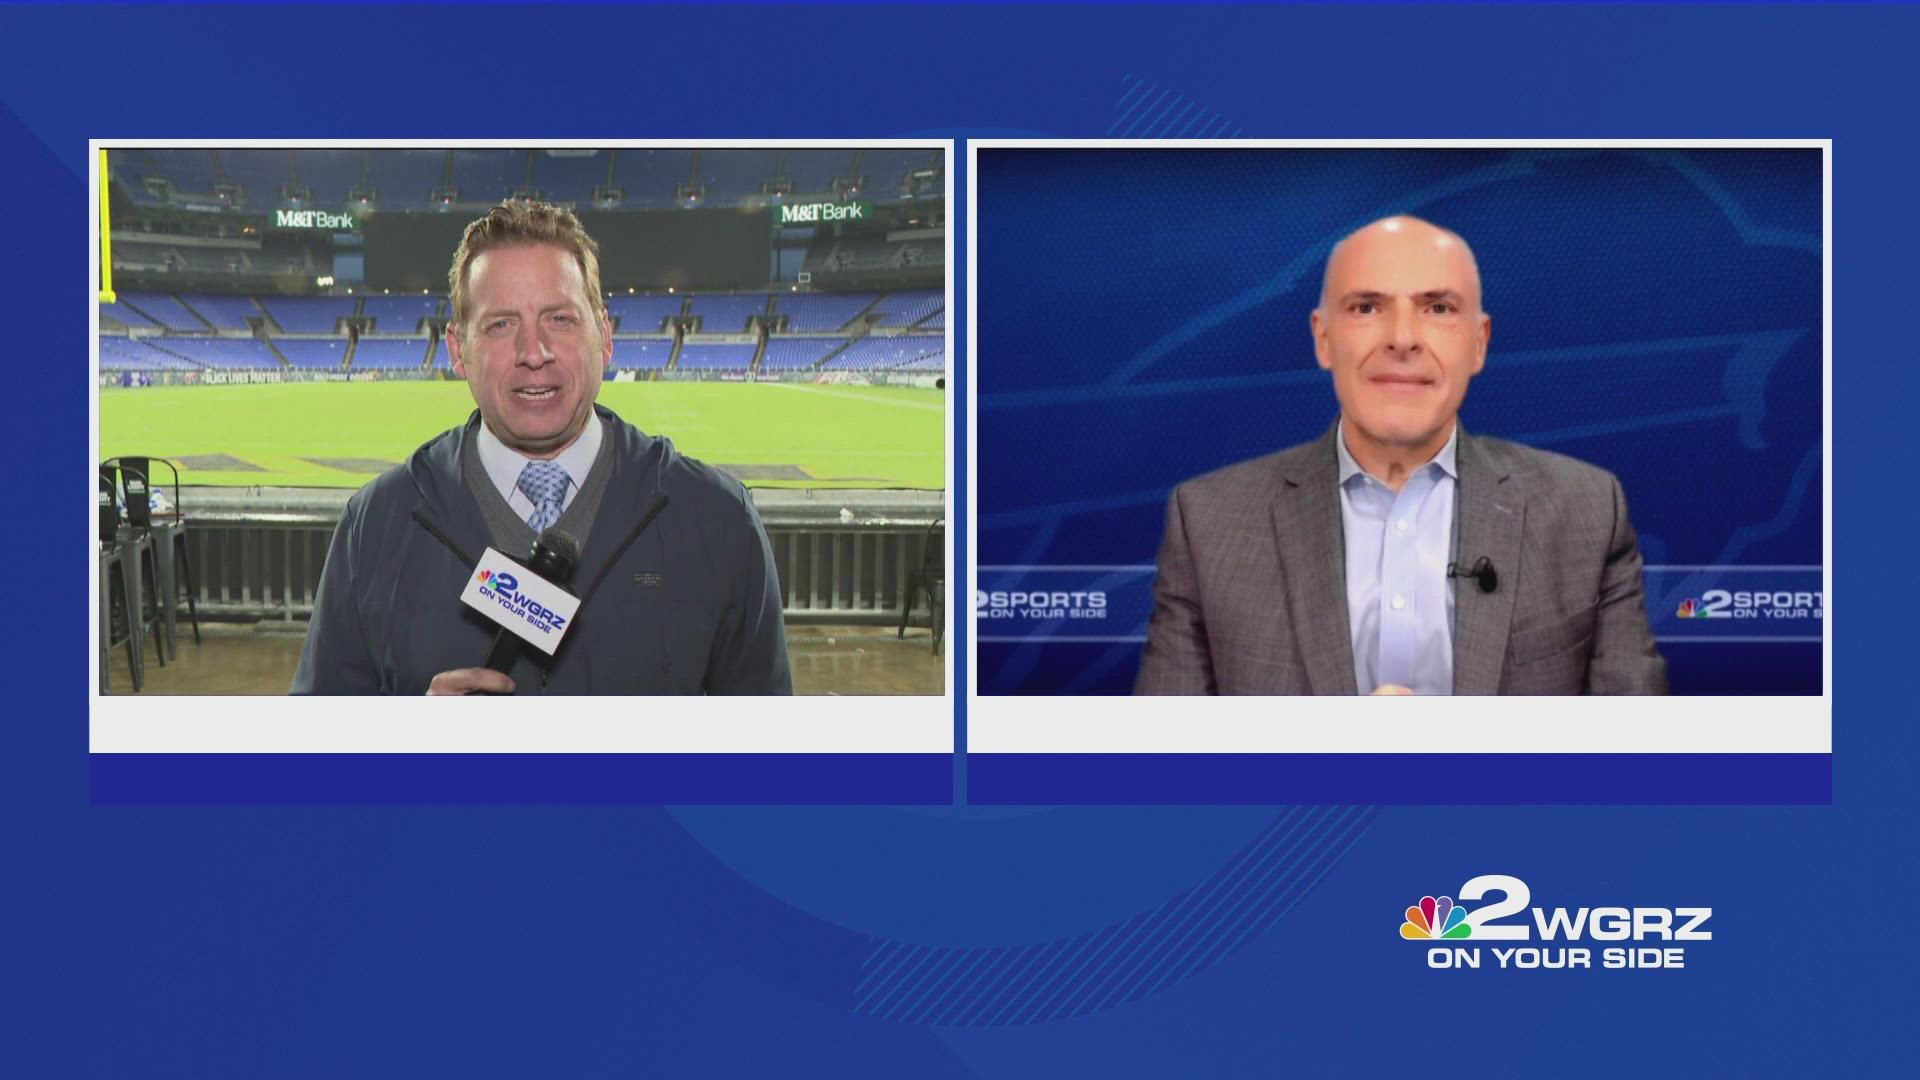 Channel 2 Sports Director Adam Benigni and WGRZ Bills/NFL Insider Vic Carucci discuss the Bills' Week 4 road win against the Baltimore Ravens.